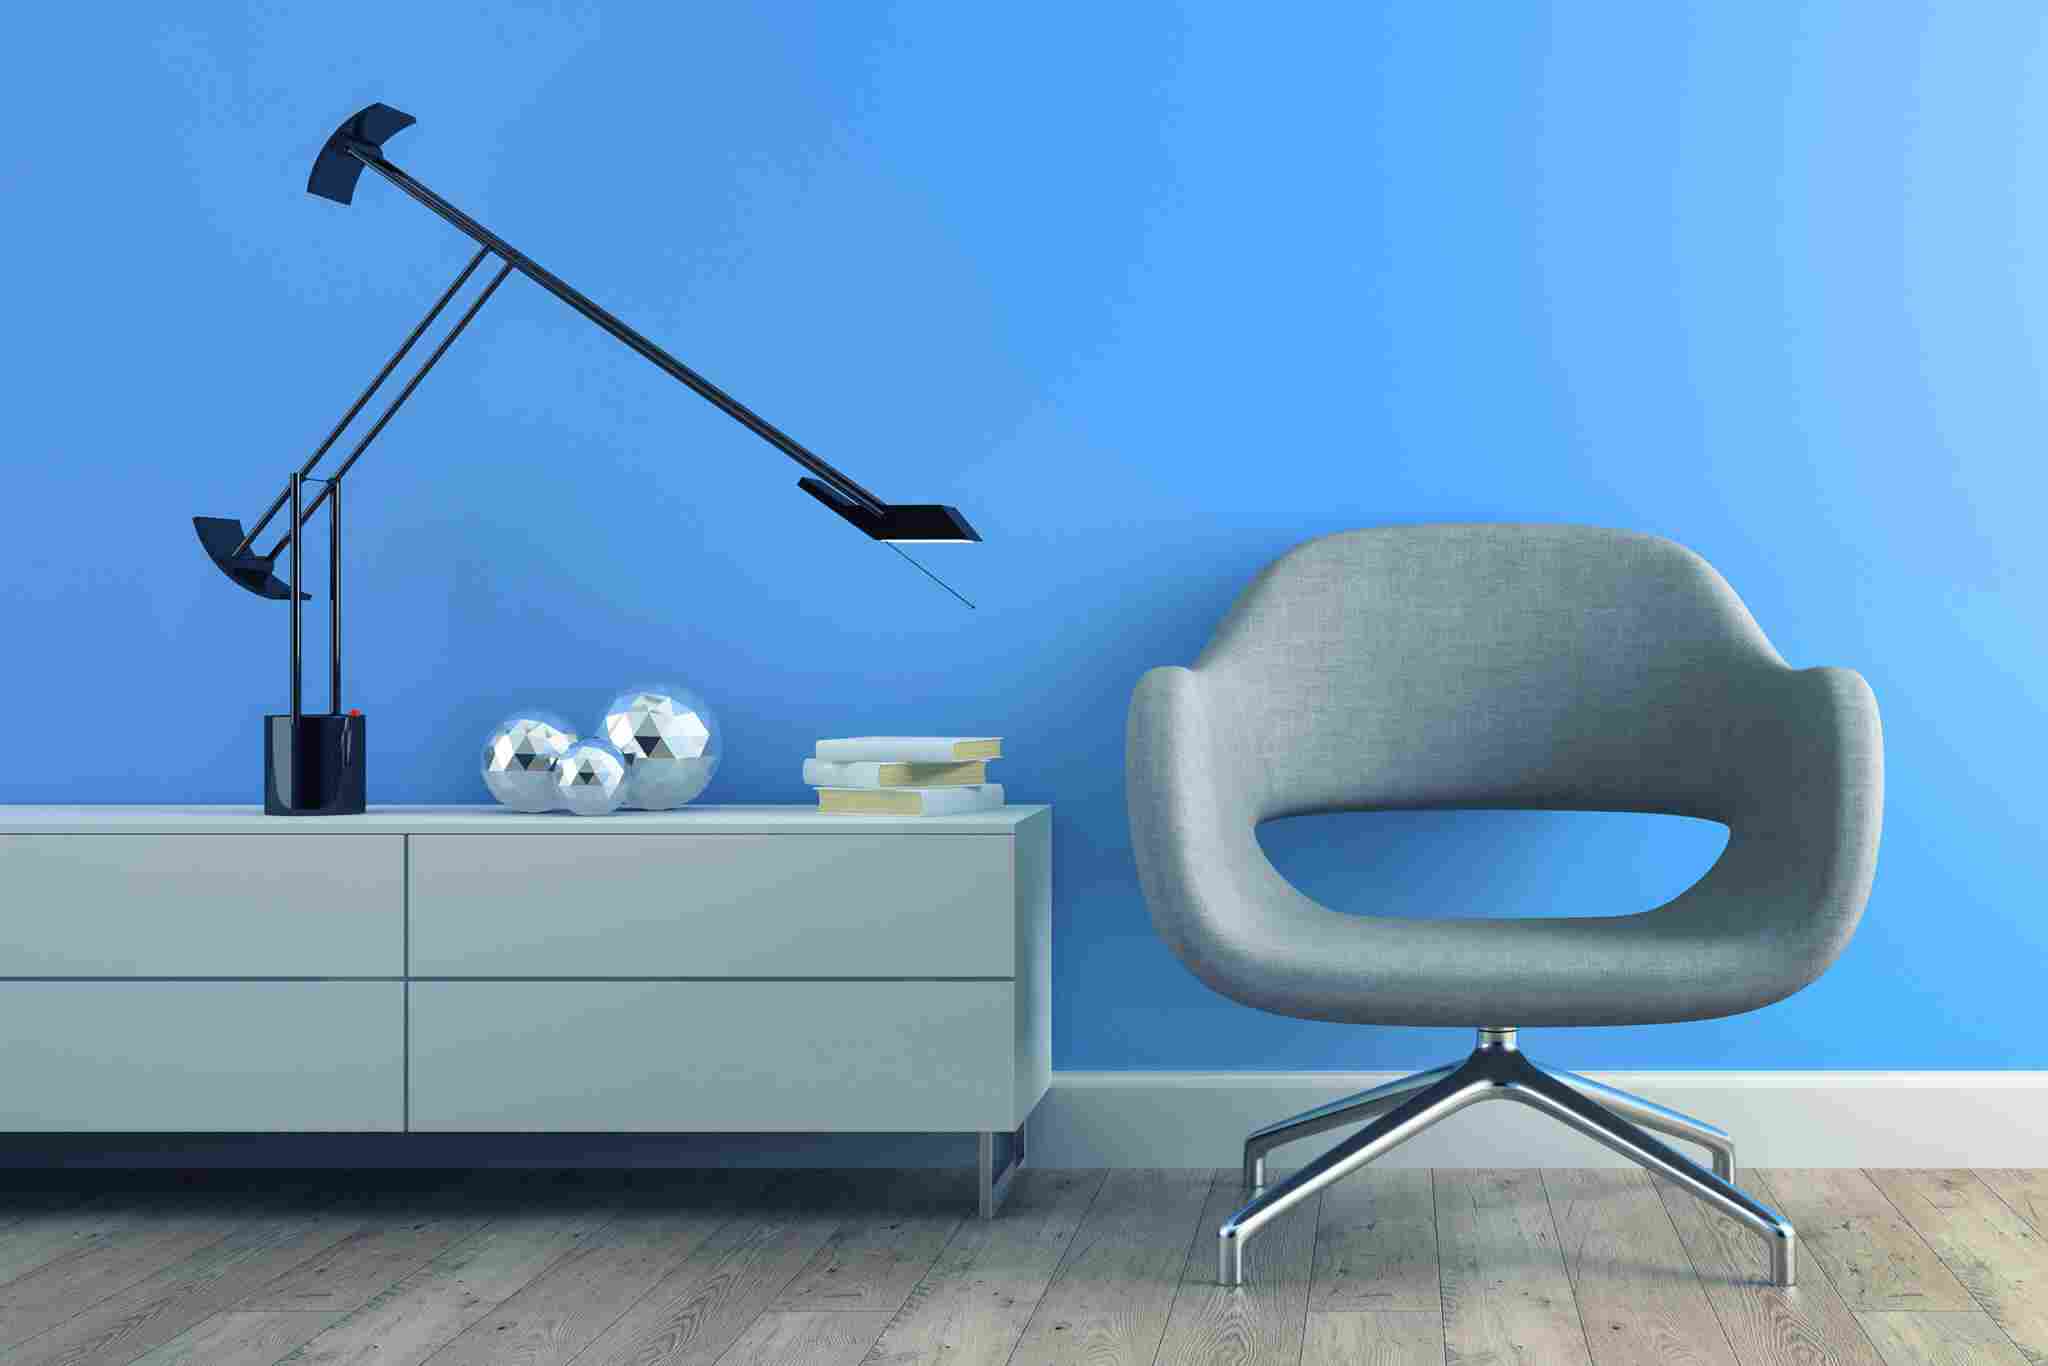 https://www.domusceramiche.com/wp-content/uploads/2017/05/image-chair-blue-wall.jpg